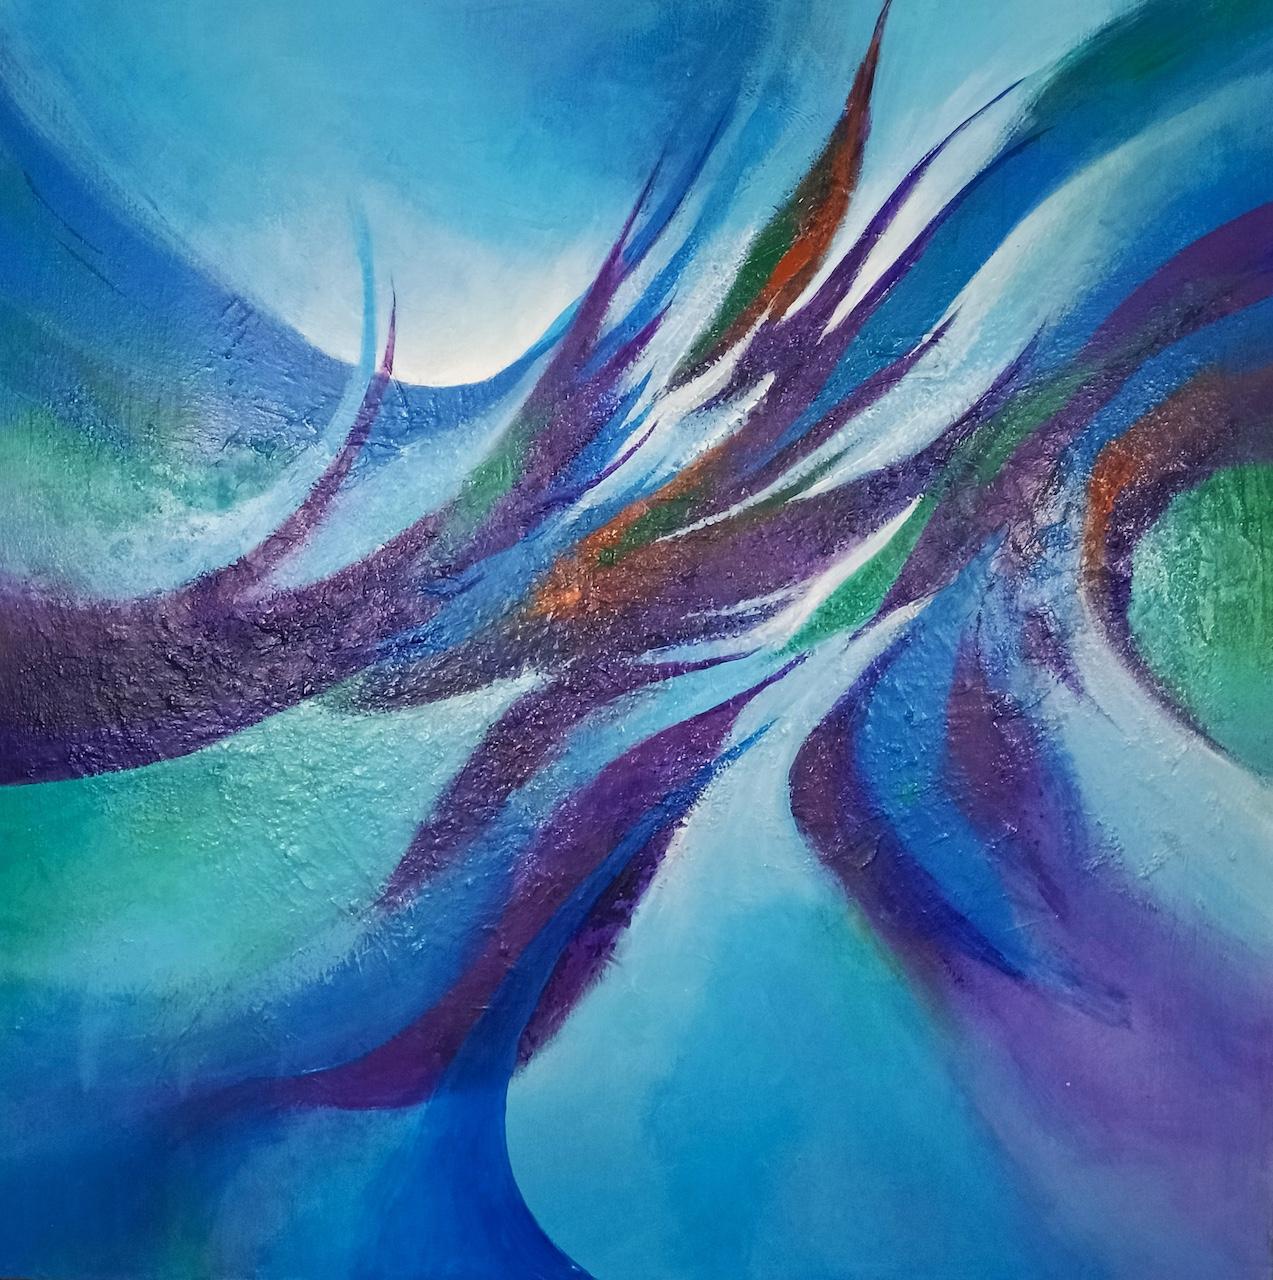 Acrylic on canvas

Christiane Hess (Chrystral) is a French abstract artist born in 1951 who lives and works in Lalinde, near Bergerac in France. Her conversion to abstract art gives her the feeling of enjoying unconstrained and limitless freedom of